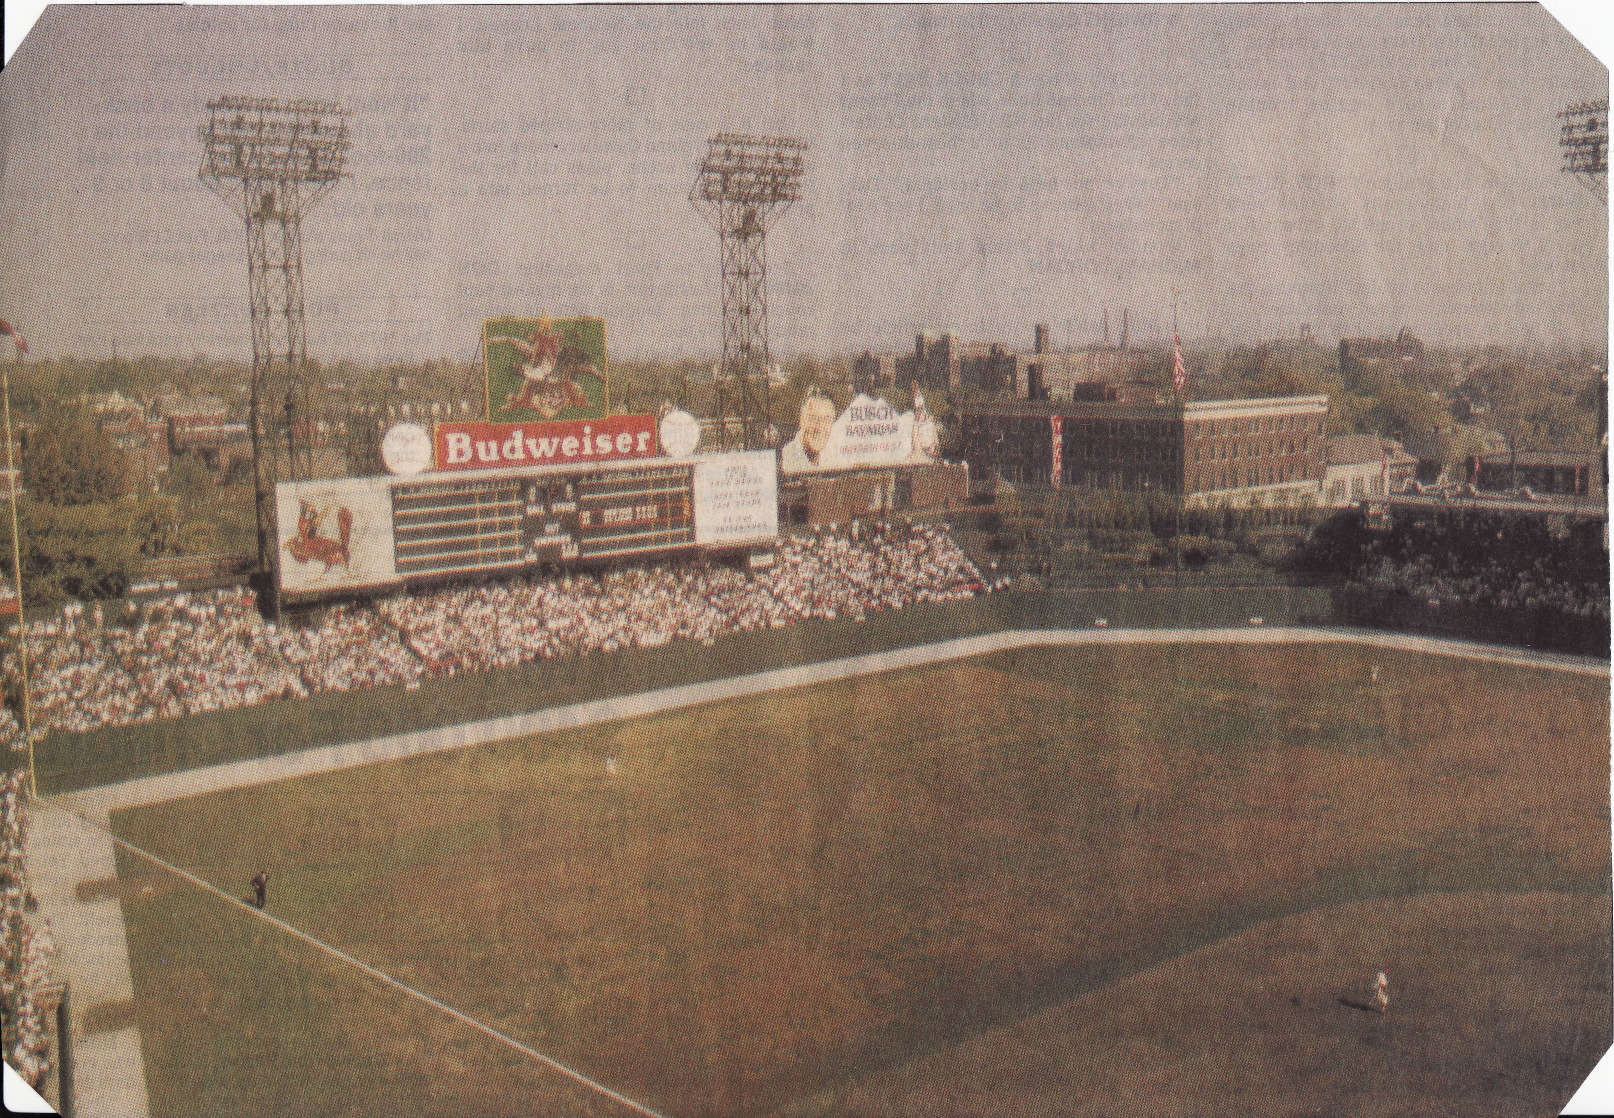 Sportsmans Park - history, photos and more of the St. Louis Cardinals